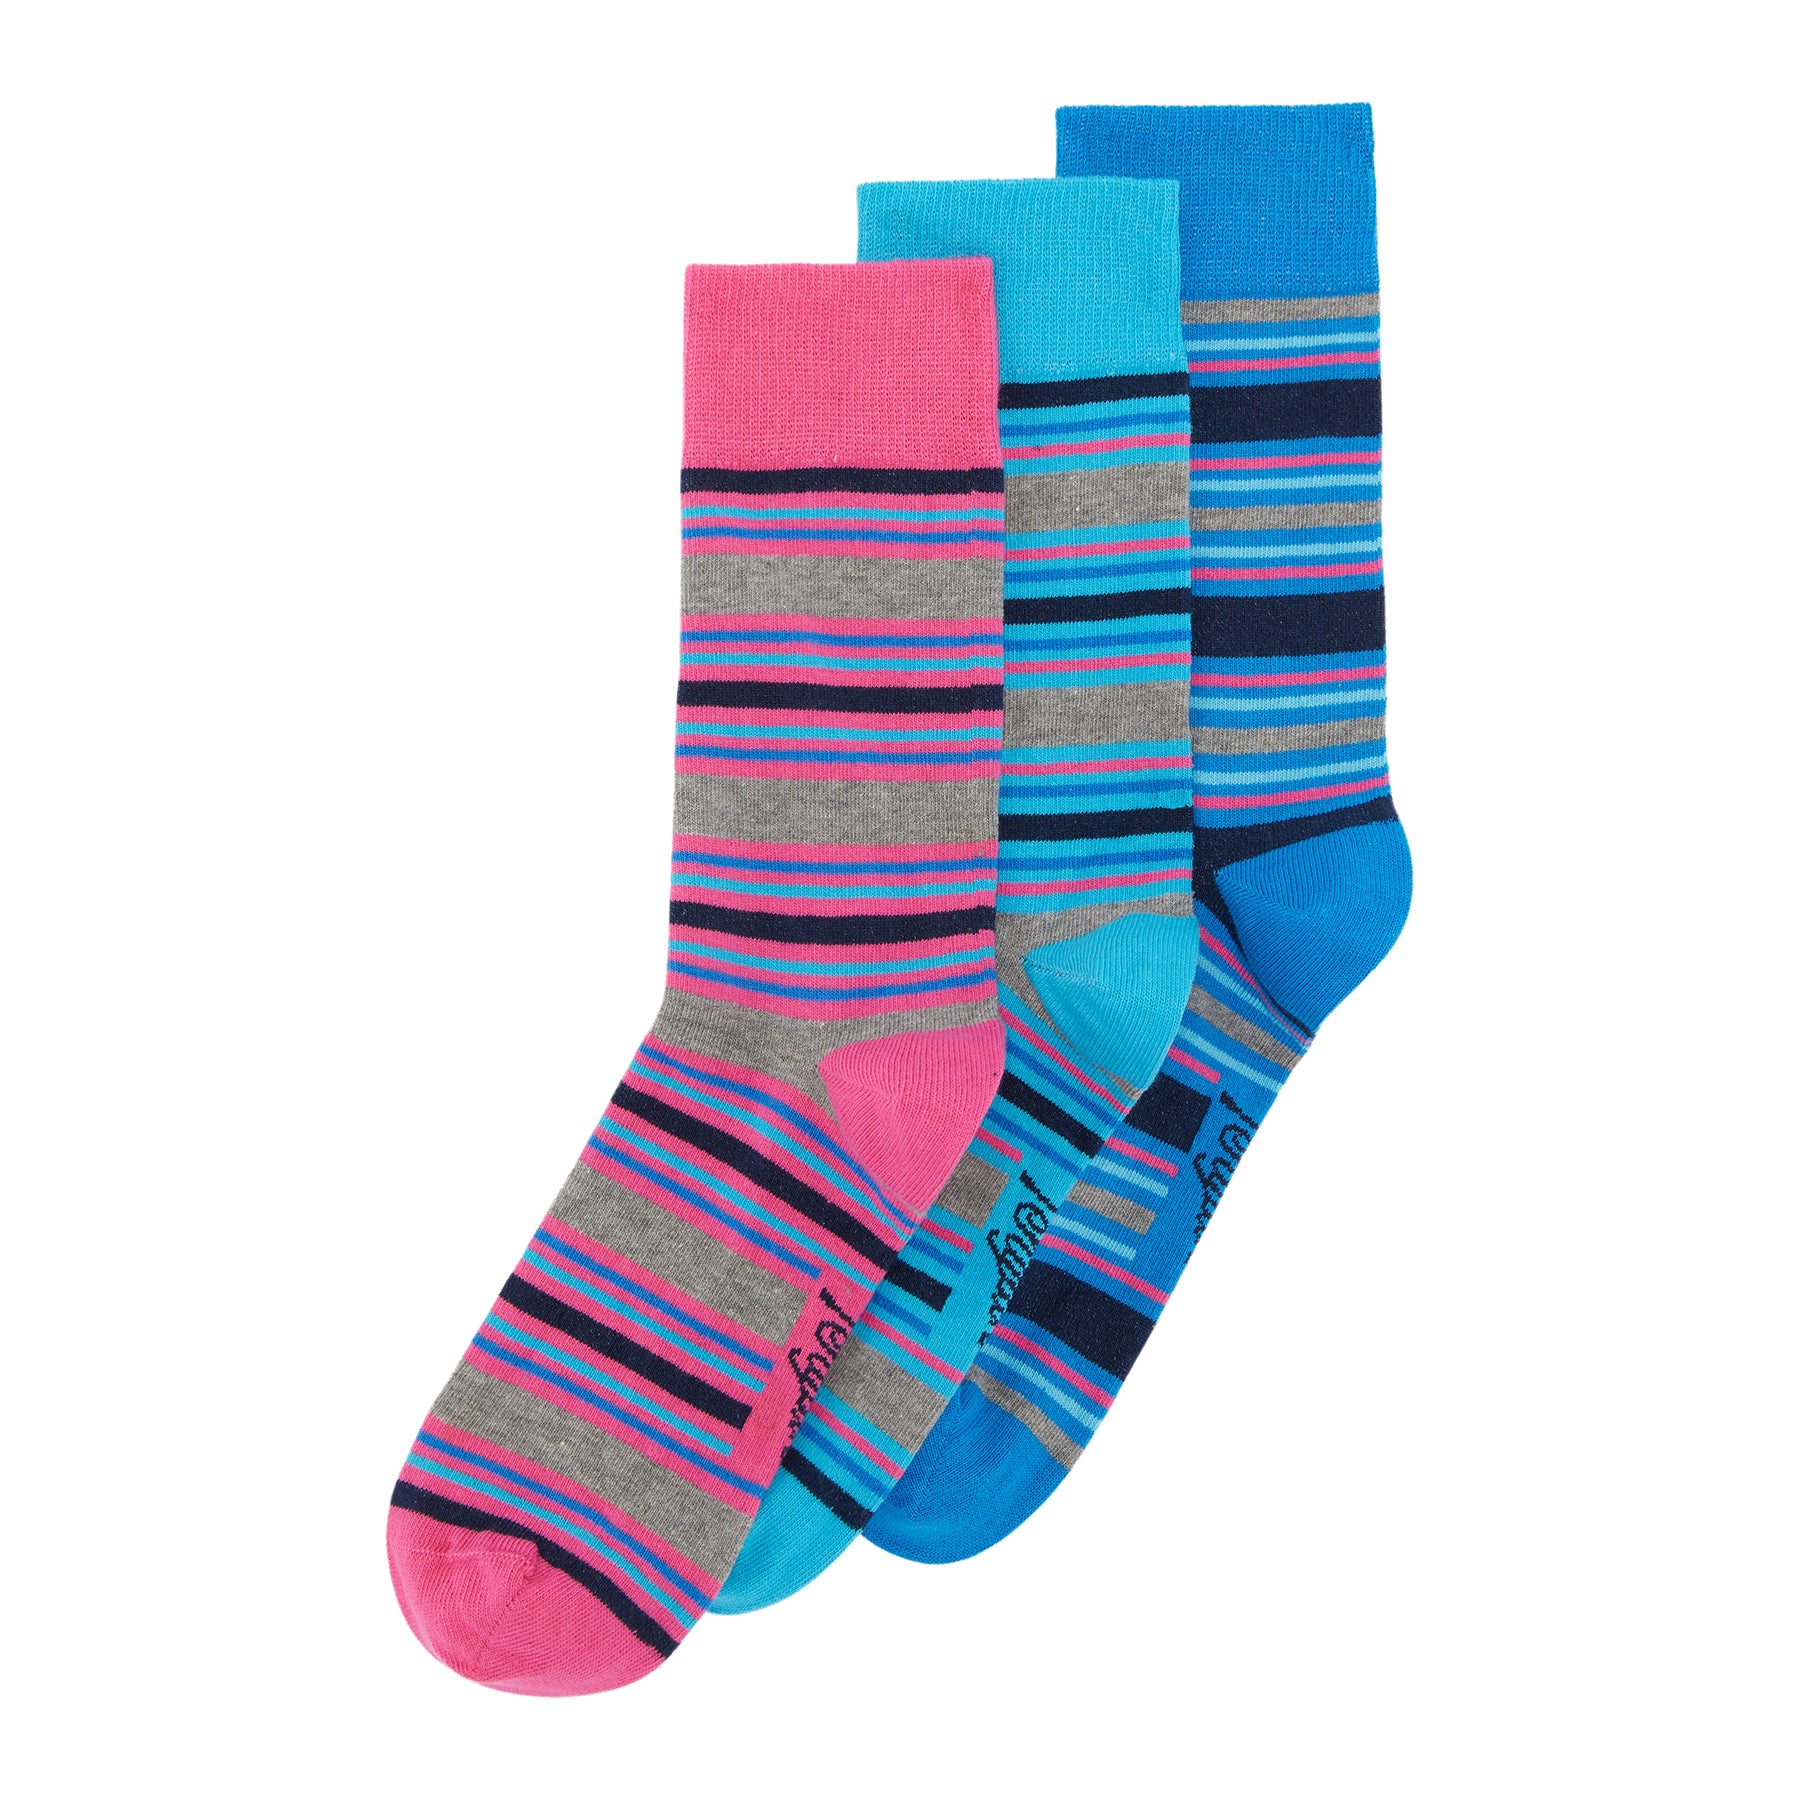 View 3 Pack Stripe Design Ankle Socks In Pink And Blue Aqua information